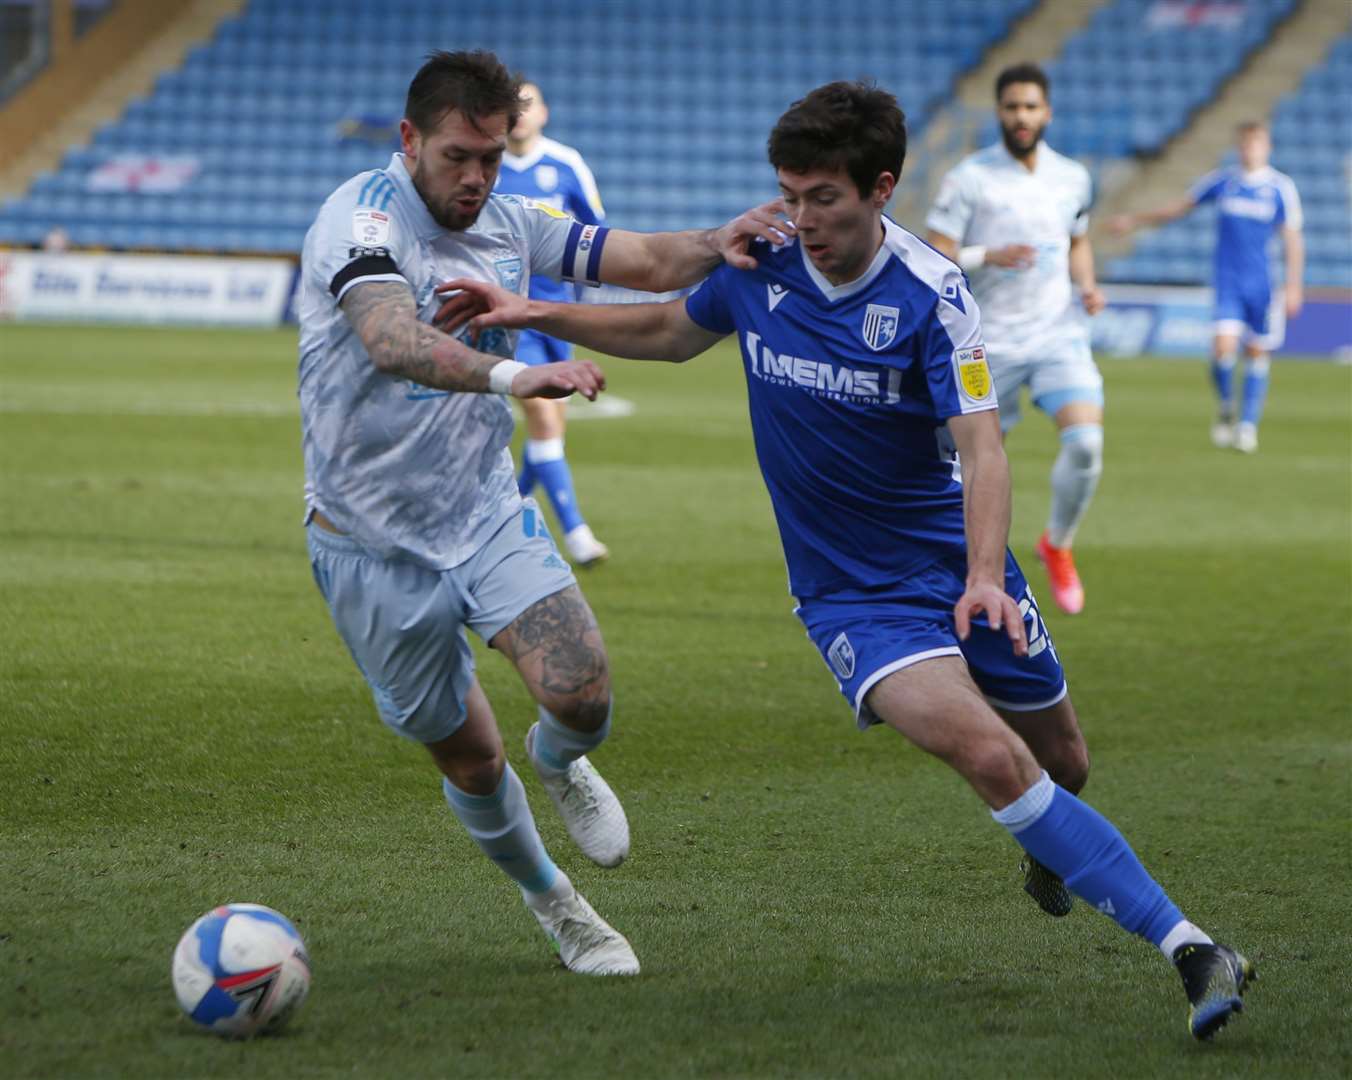 Tom O'Connor holds off Ipswich captain Luke Chambers. Picture: Andy Jones